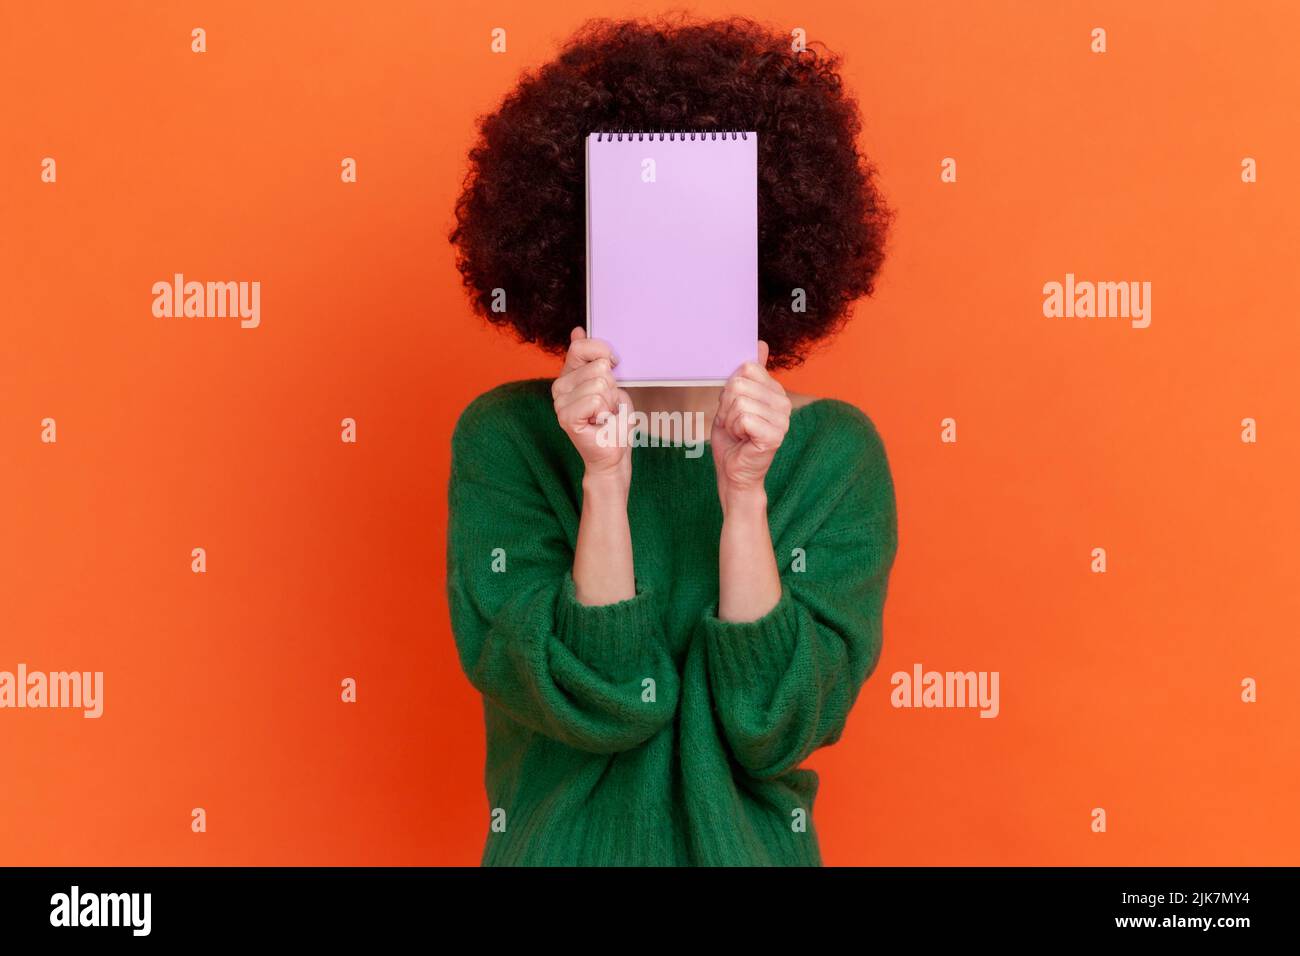 Portrait of unknown woman with Afro hairstyle wearing green casual style sweater standing holding organizer, hiding her face behind paper notebook. Indoor studio shot isolated on orange background. Stock Photo